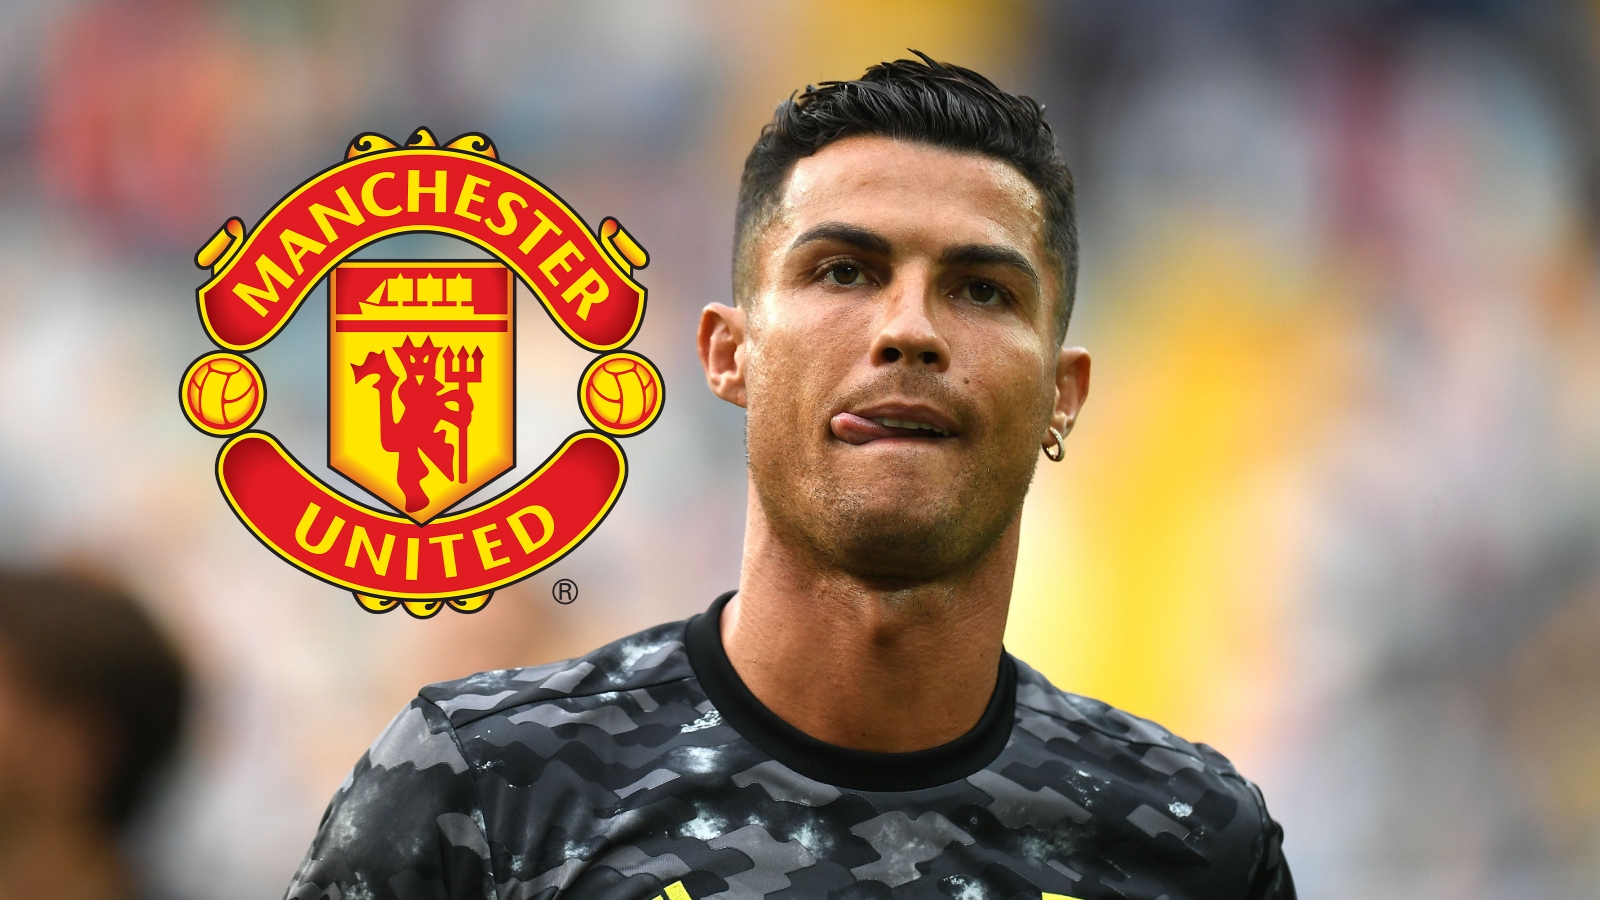 Ronaldo hints he could stay at Man Utd for next 'three or four years' as £20m summer signing declares he's back to 'win again'